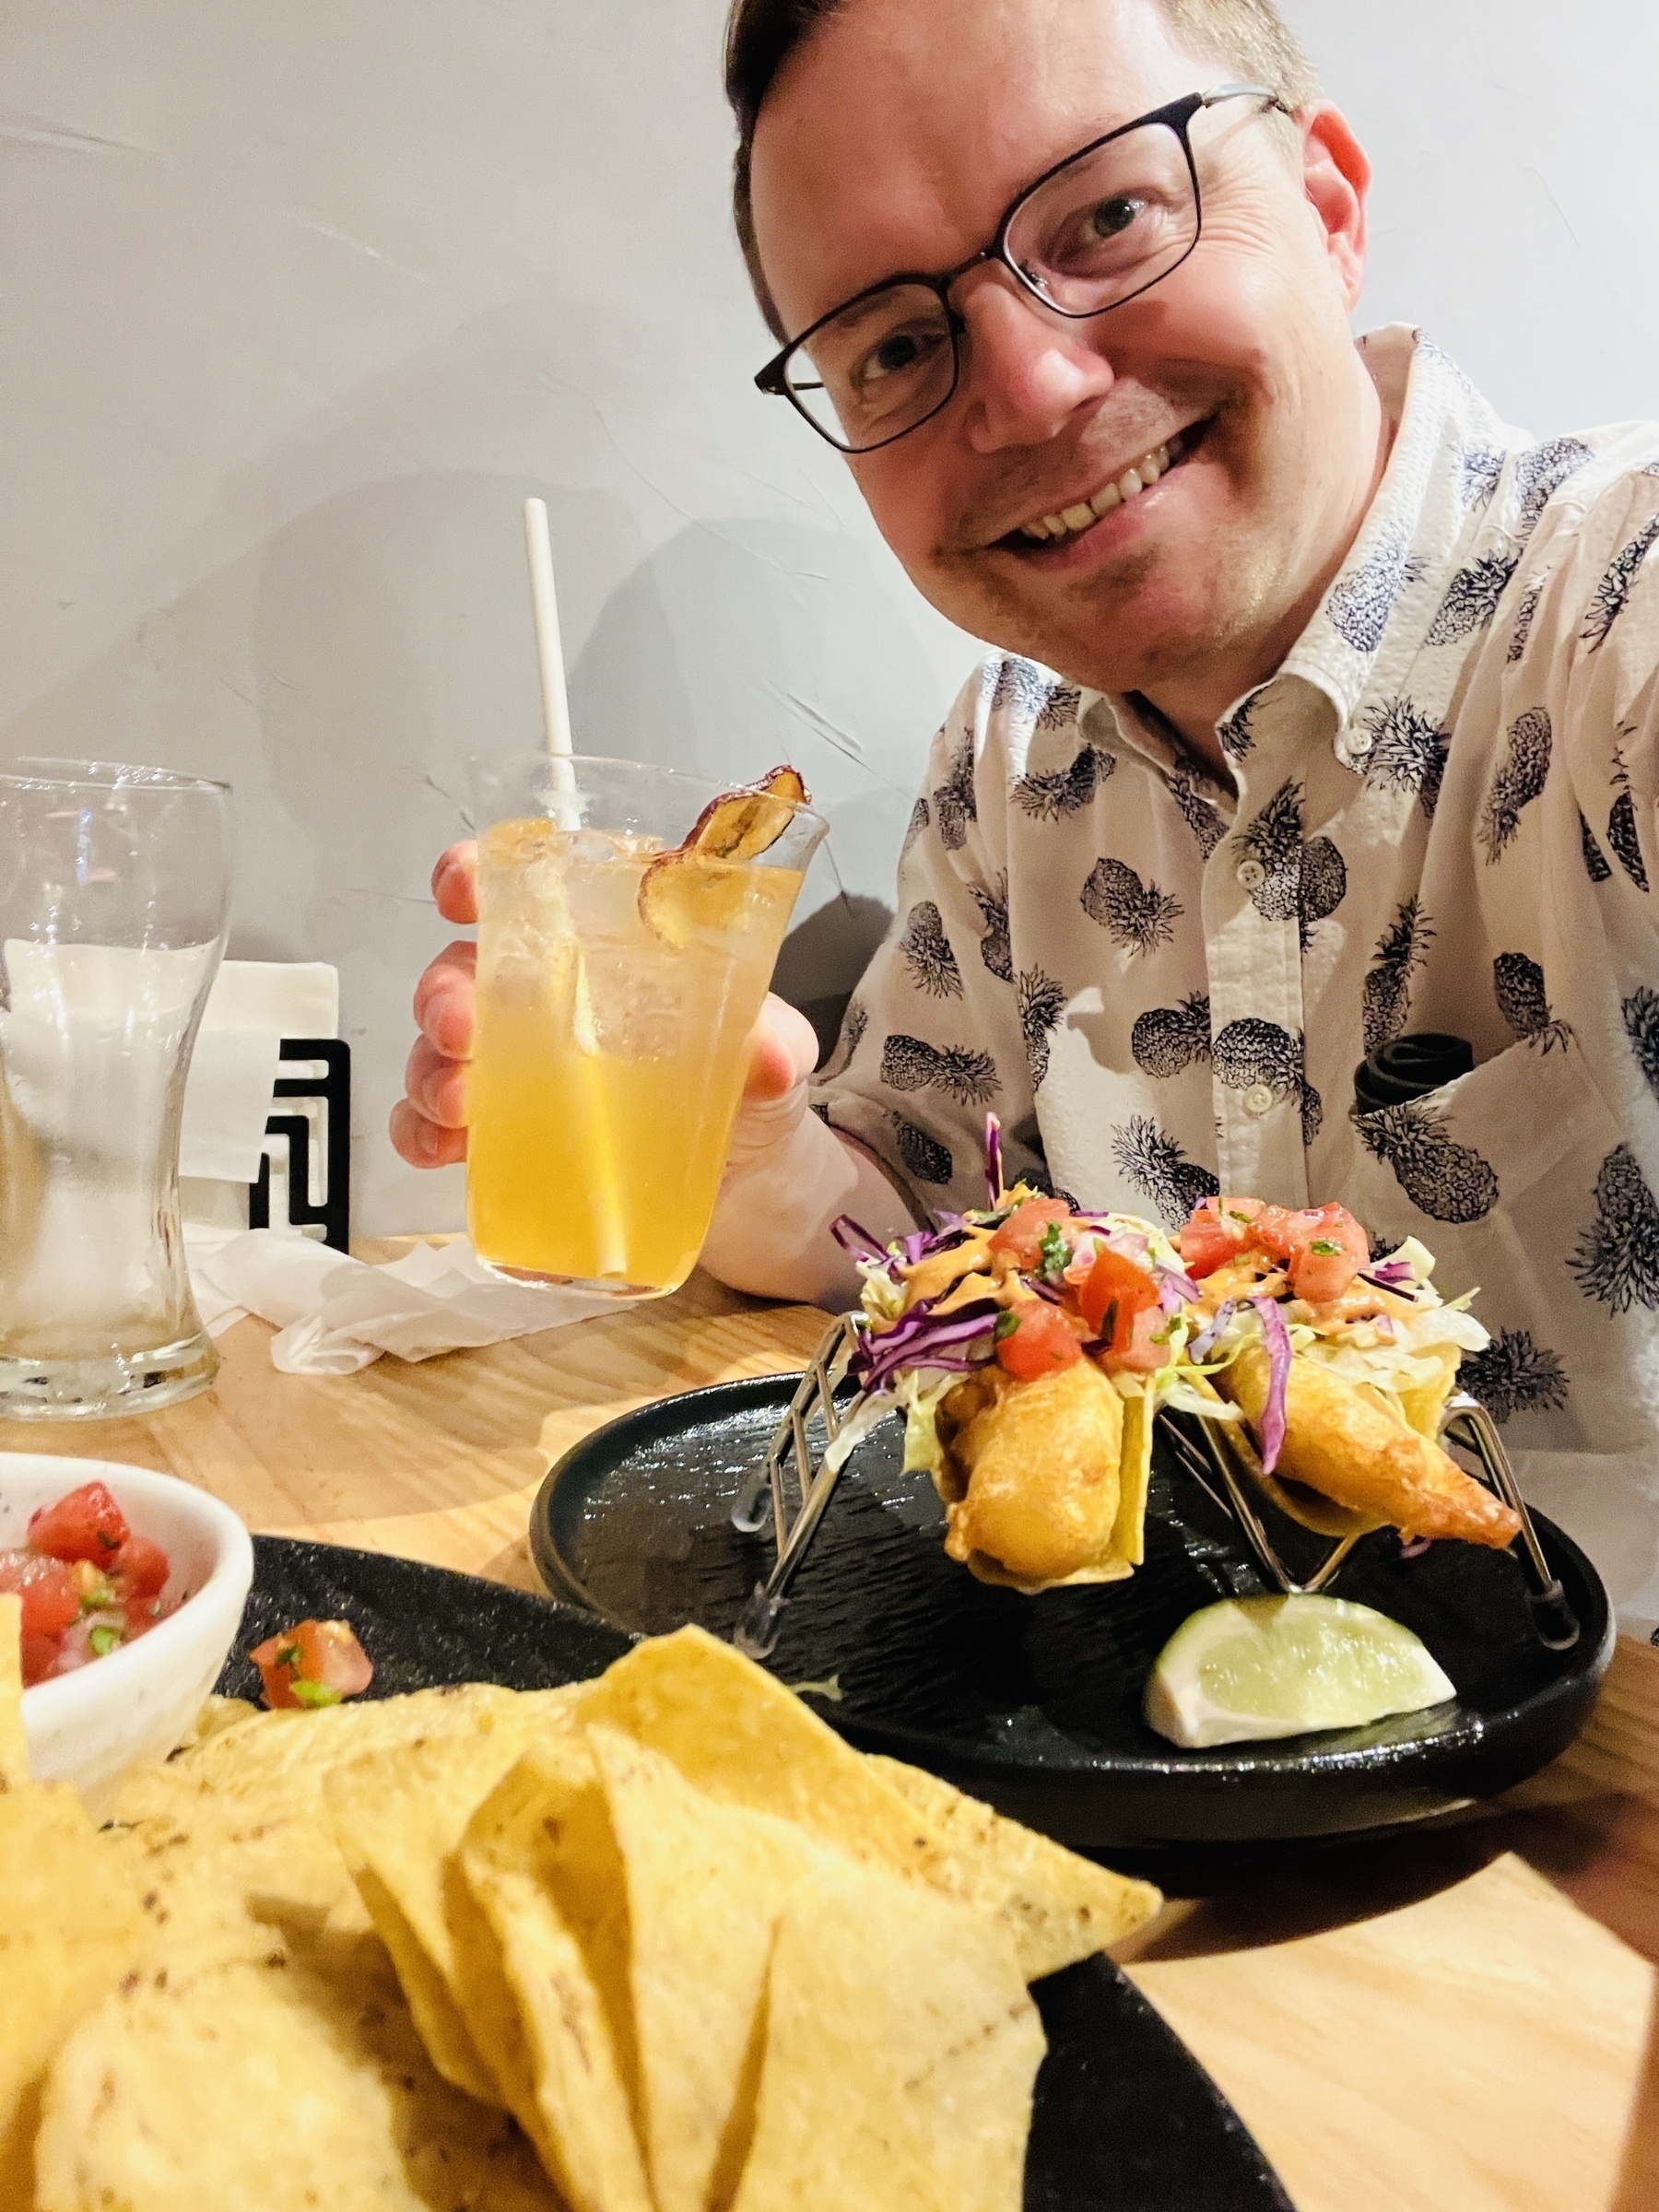 Chad hovering menacingly over some fish tacos and a plate of chips and salsa, holding a fruity tea beverage